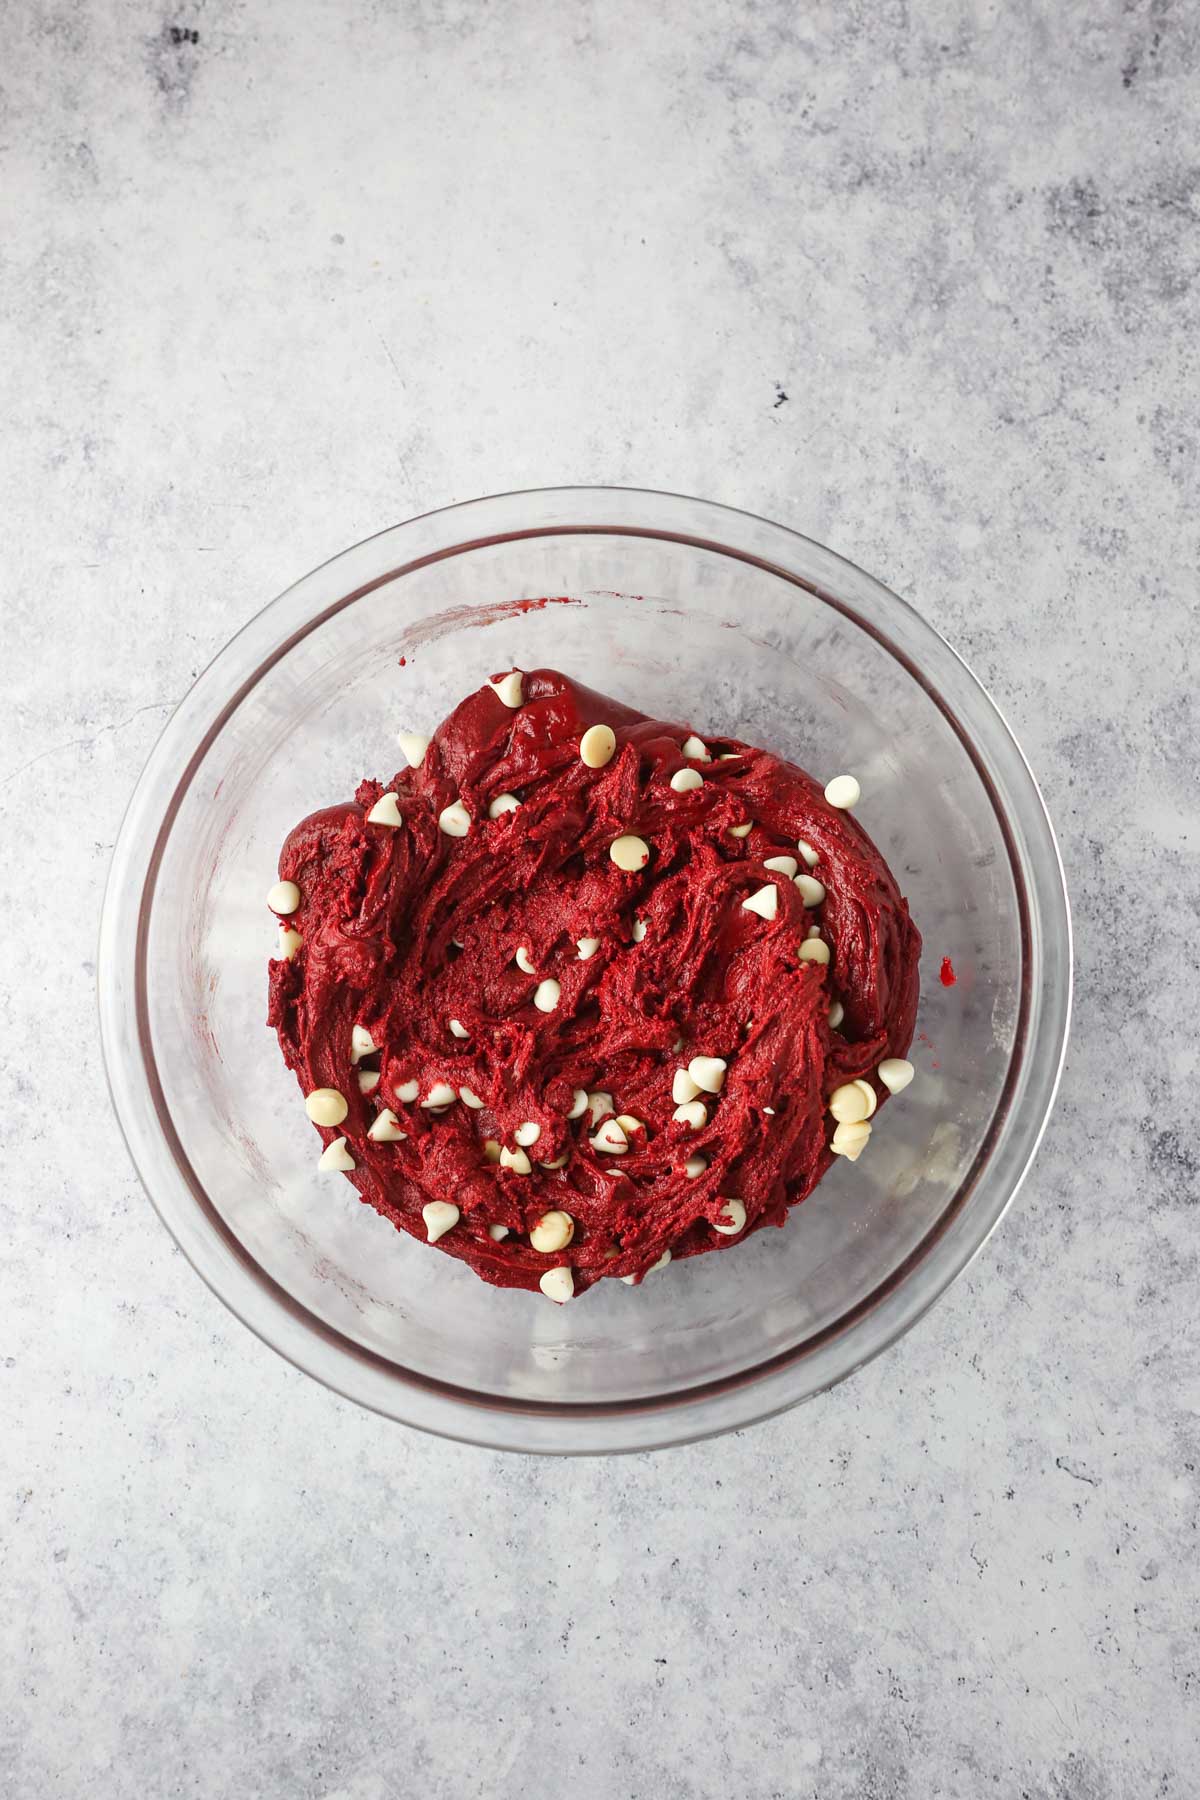 White chocolate chips folded into the red brownie batter.